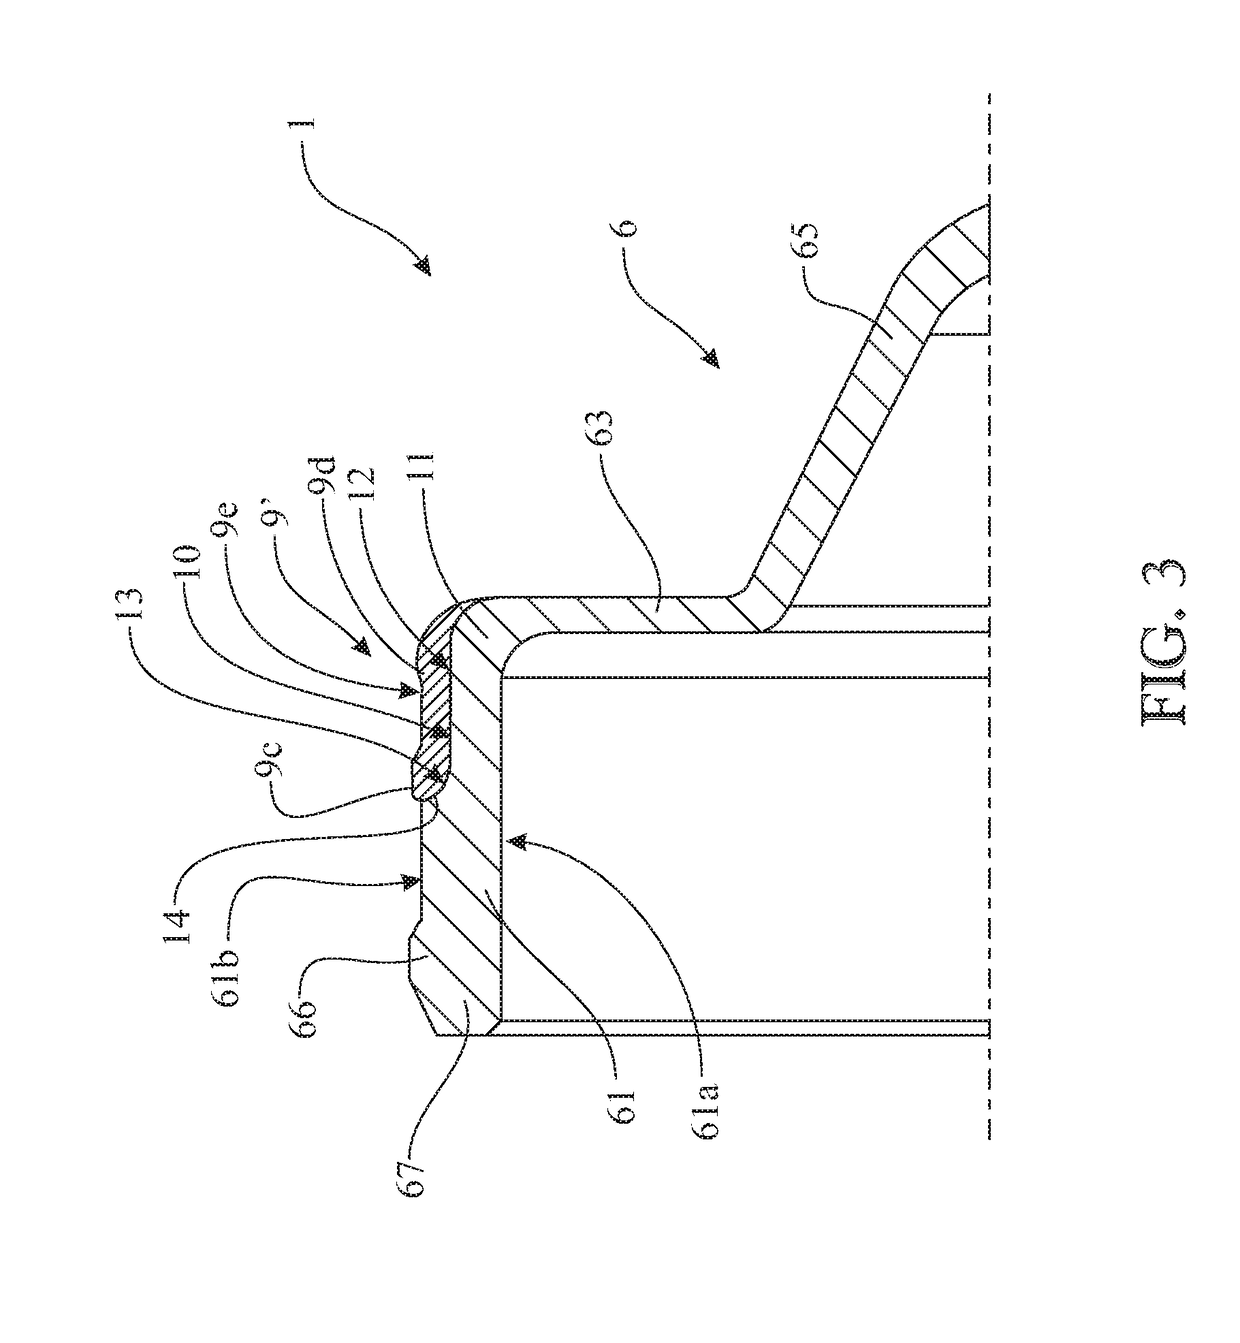 Sealing device for a hub/wheel assembly and hub/wheel assembly having such a sealing device